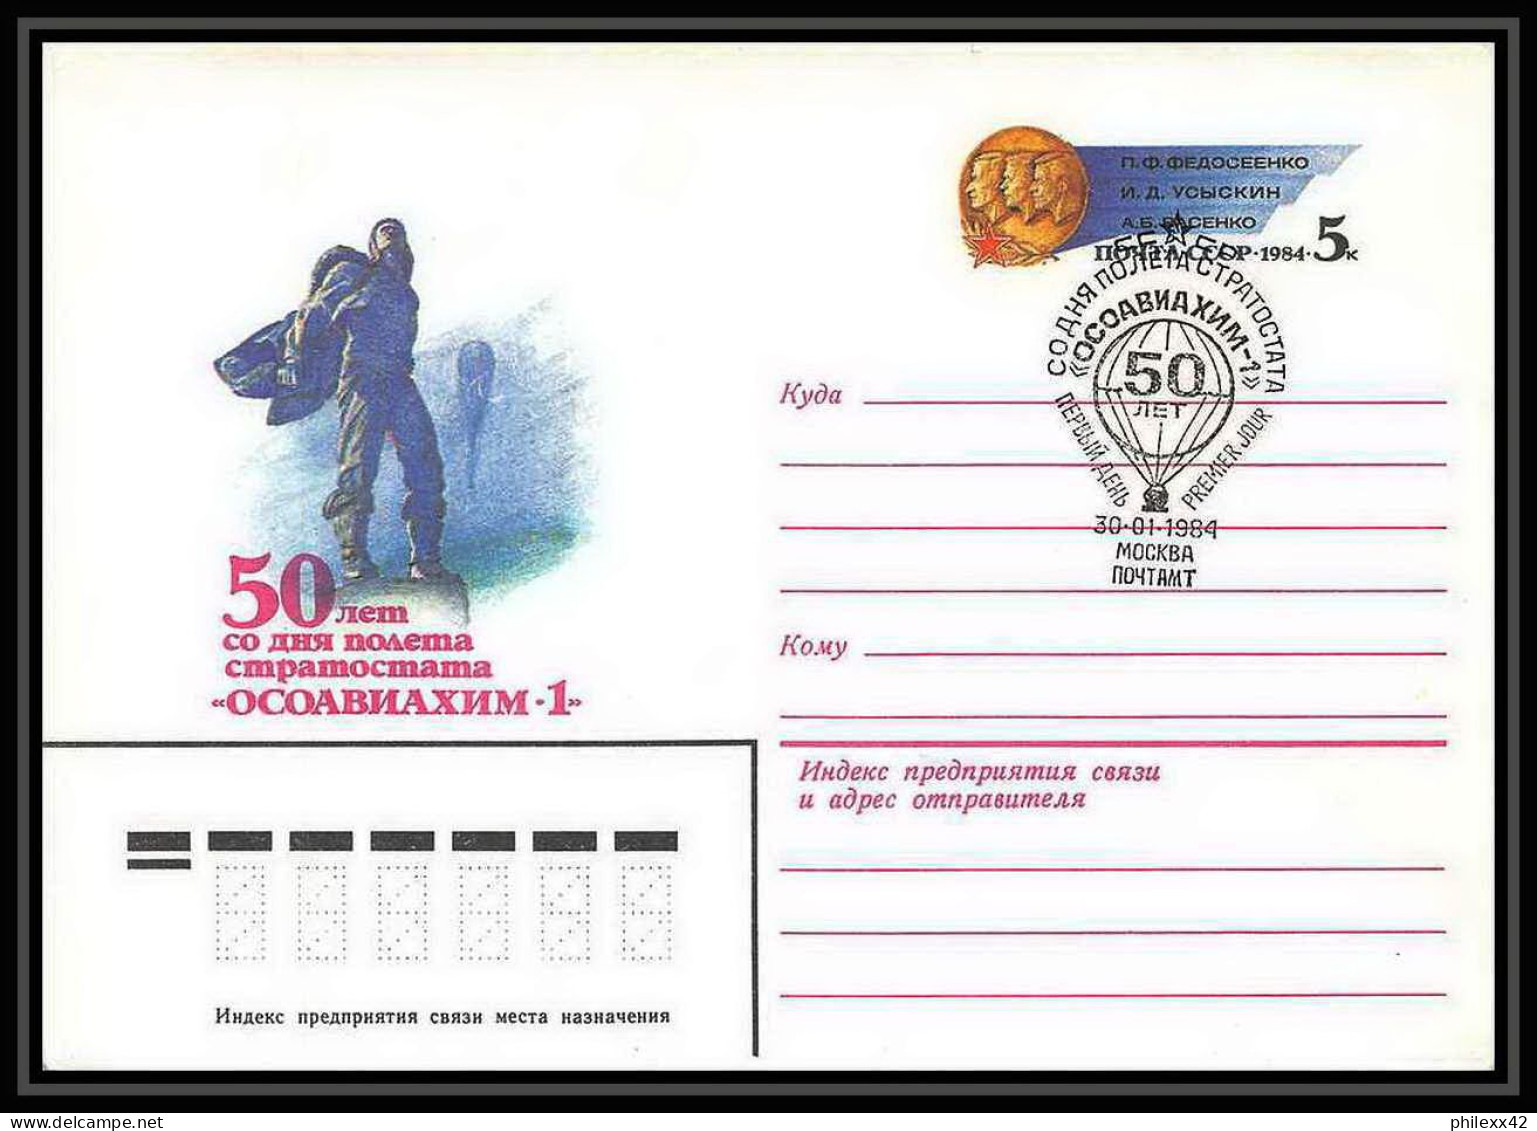 9115/ Espace (space Raumfahrt) Entier Postal (Stamped Stationery) 30/1/1984 (Russia Urss USSR) - Rusia & URSS